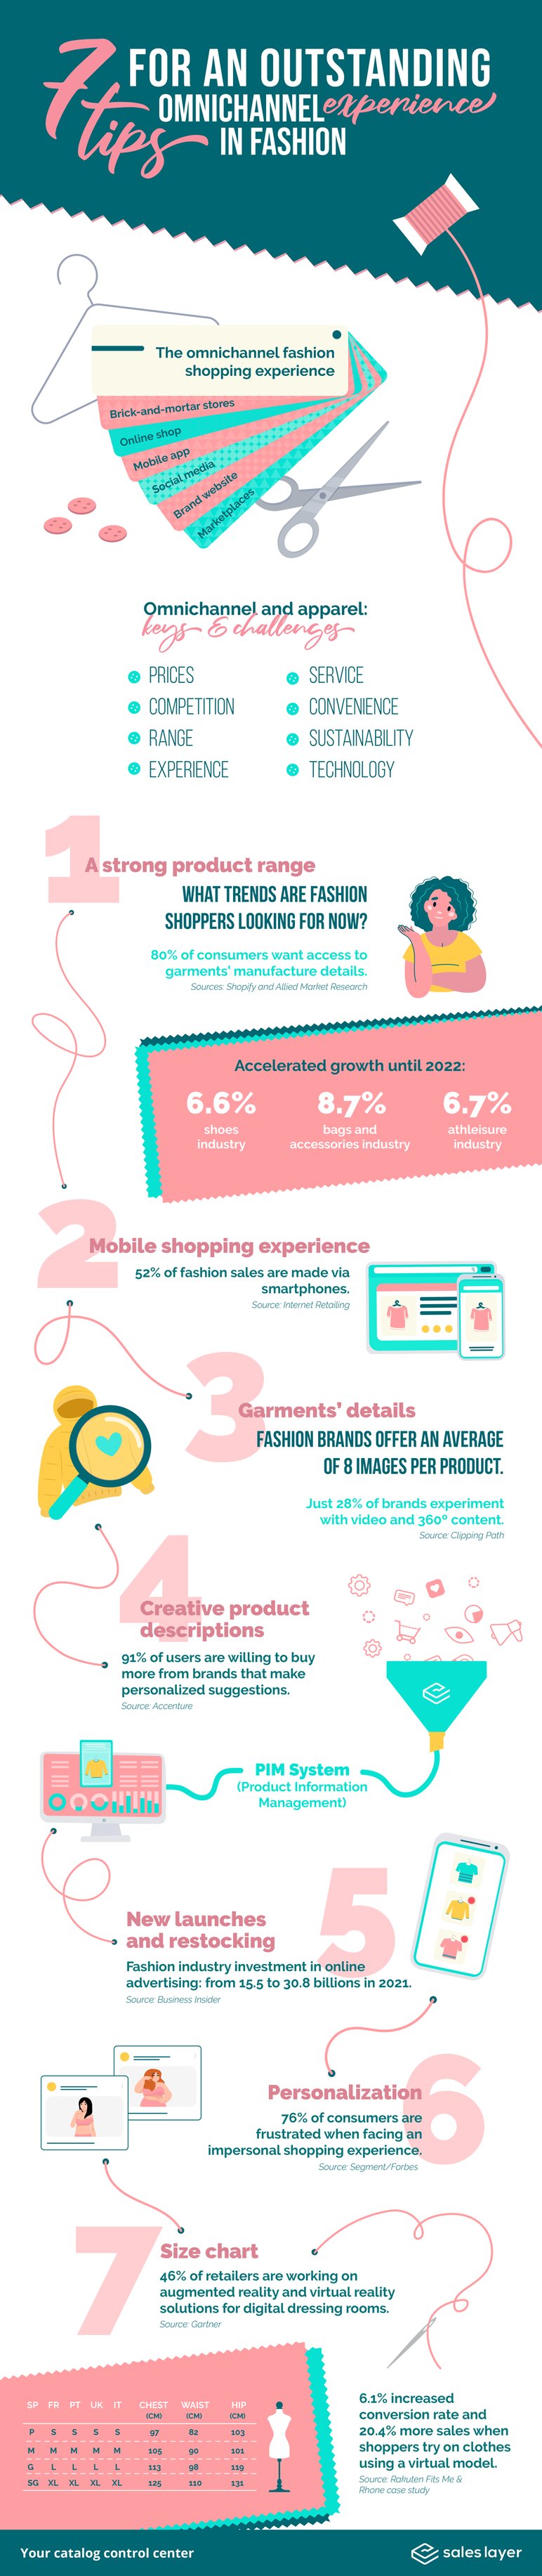 Omnichannel experience in fashion industry-infographic